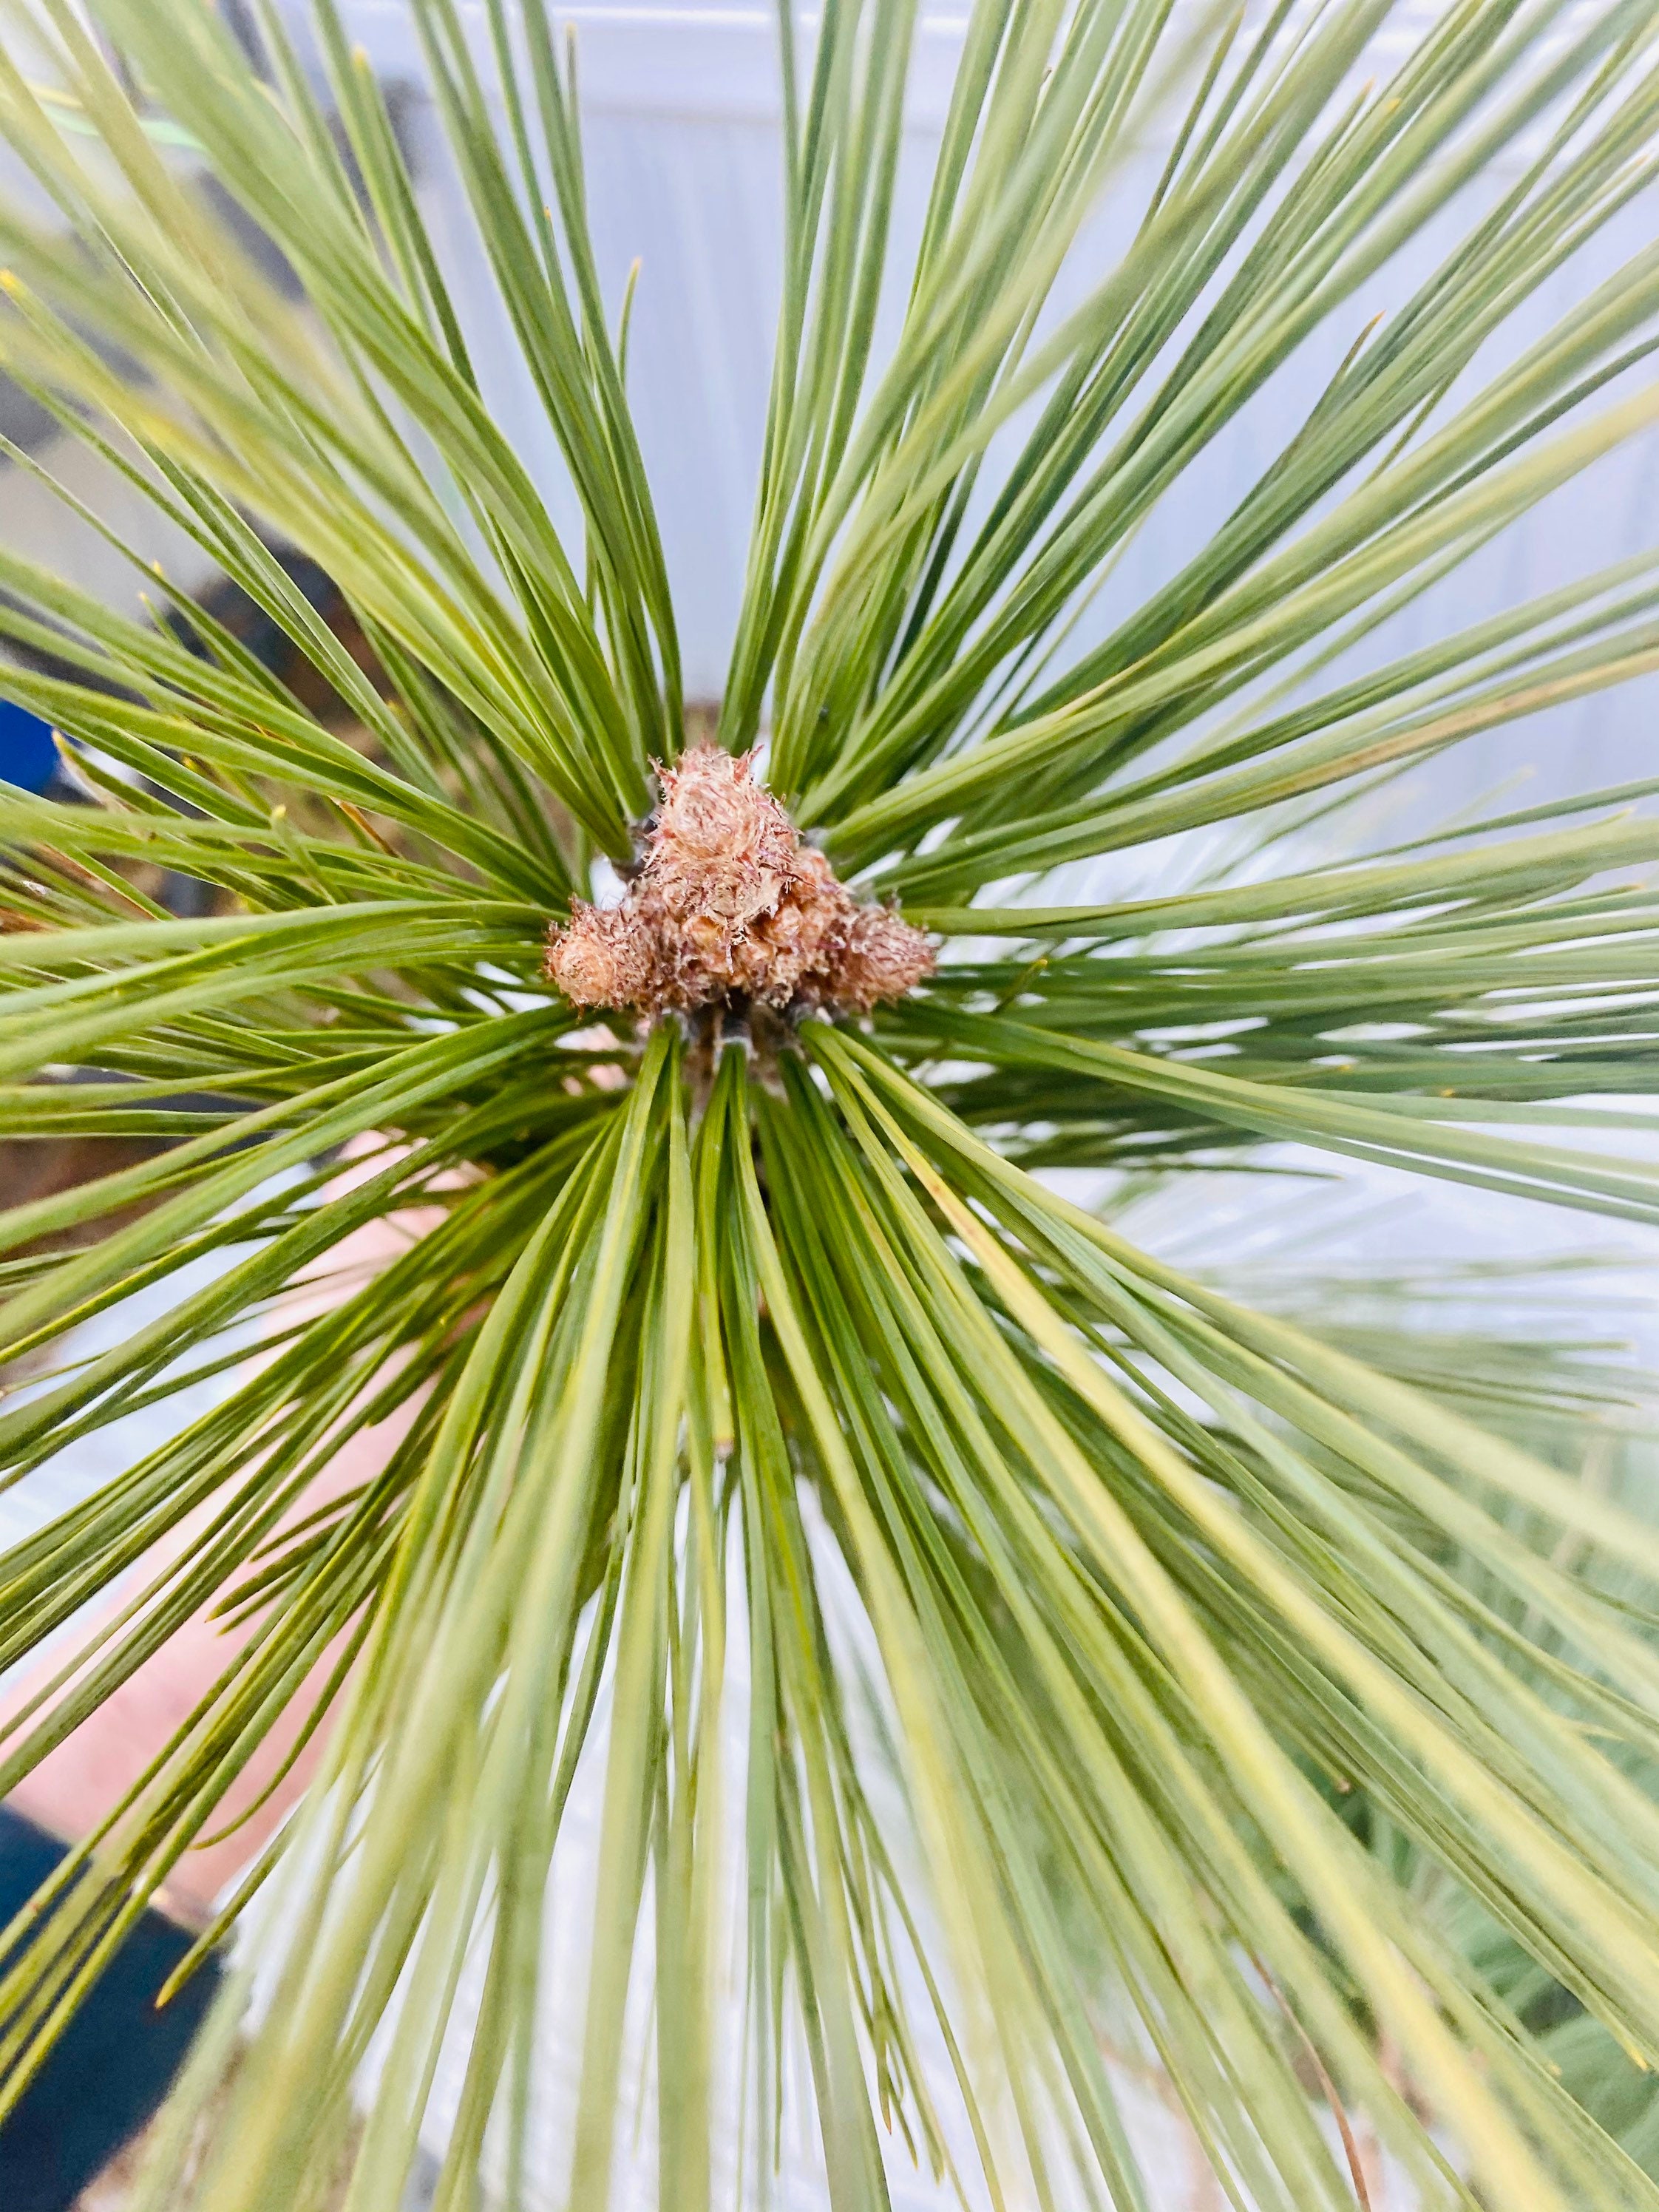 3 Loblolly Pine Branches With Pine Needle Bundles 